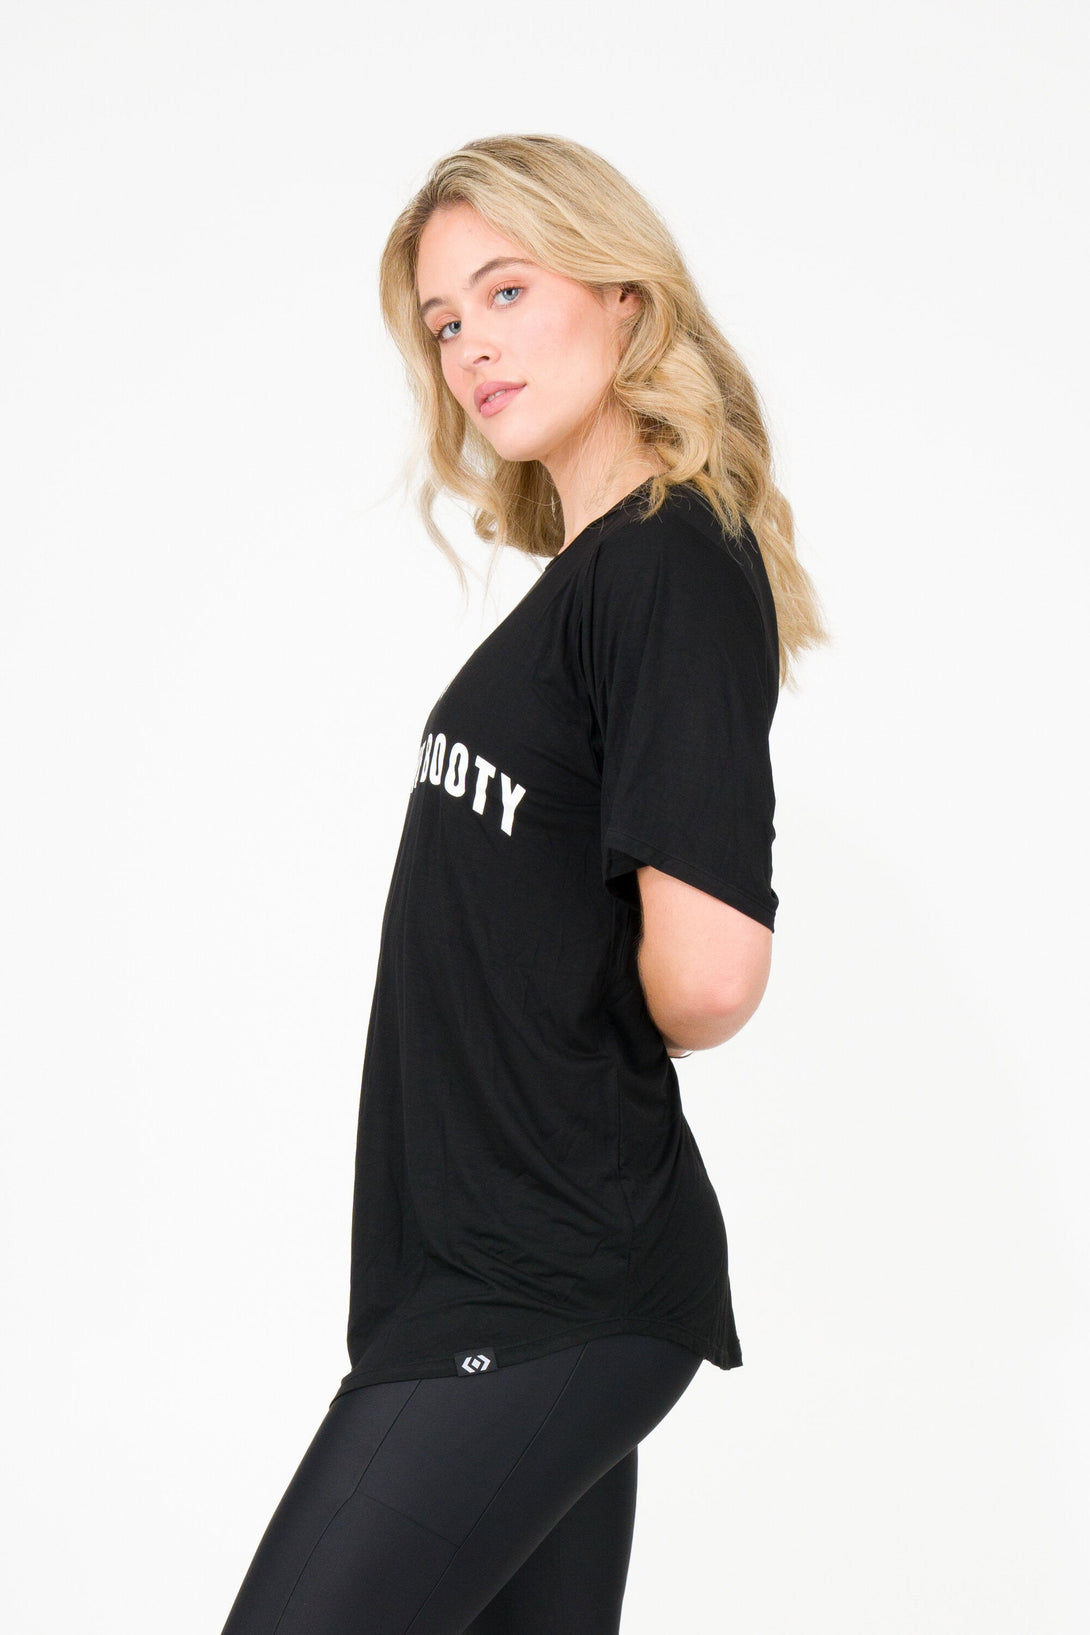 Do It For The Booty Black Slinky To Touch - Plain Boyfriend Tee-Activewear-Exoticathletica